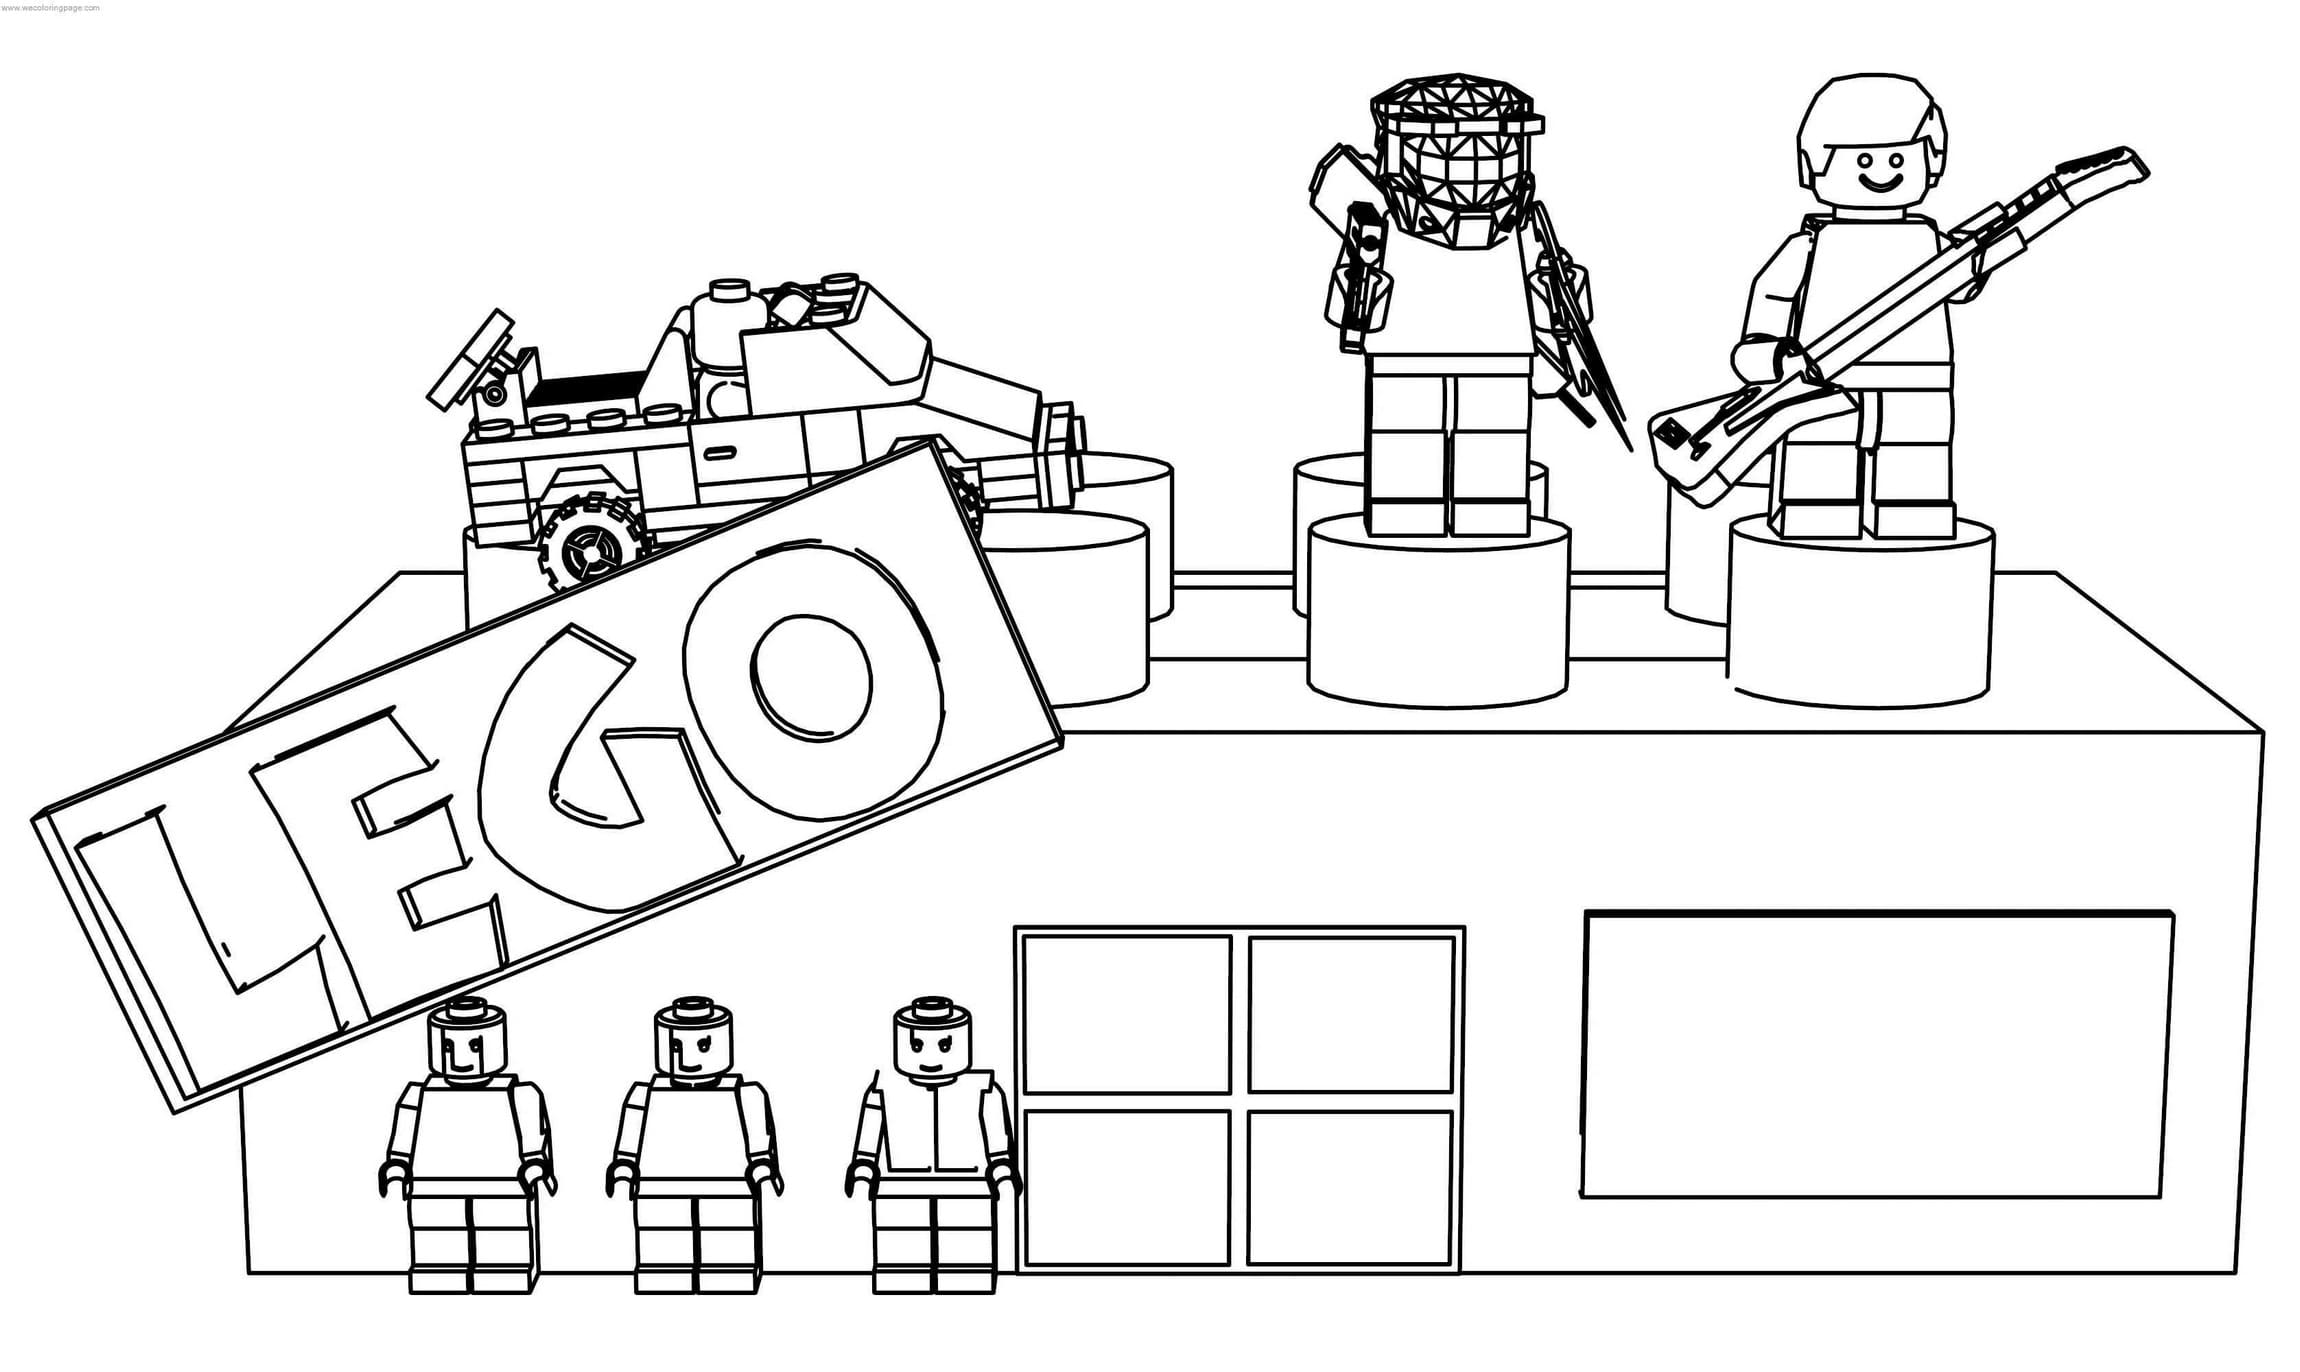 Charming lego city coloring book